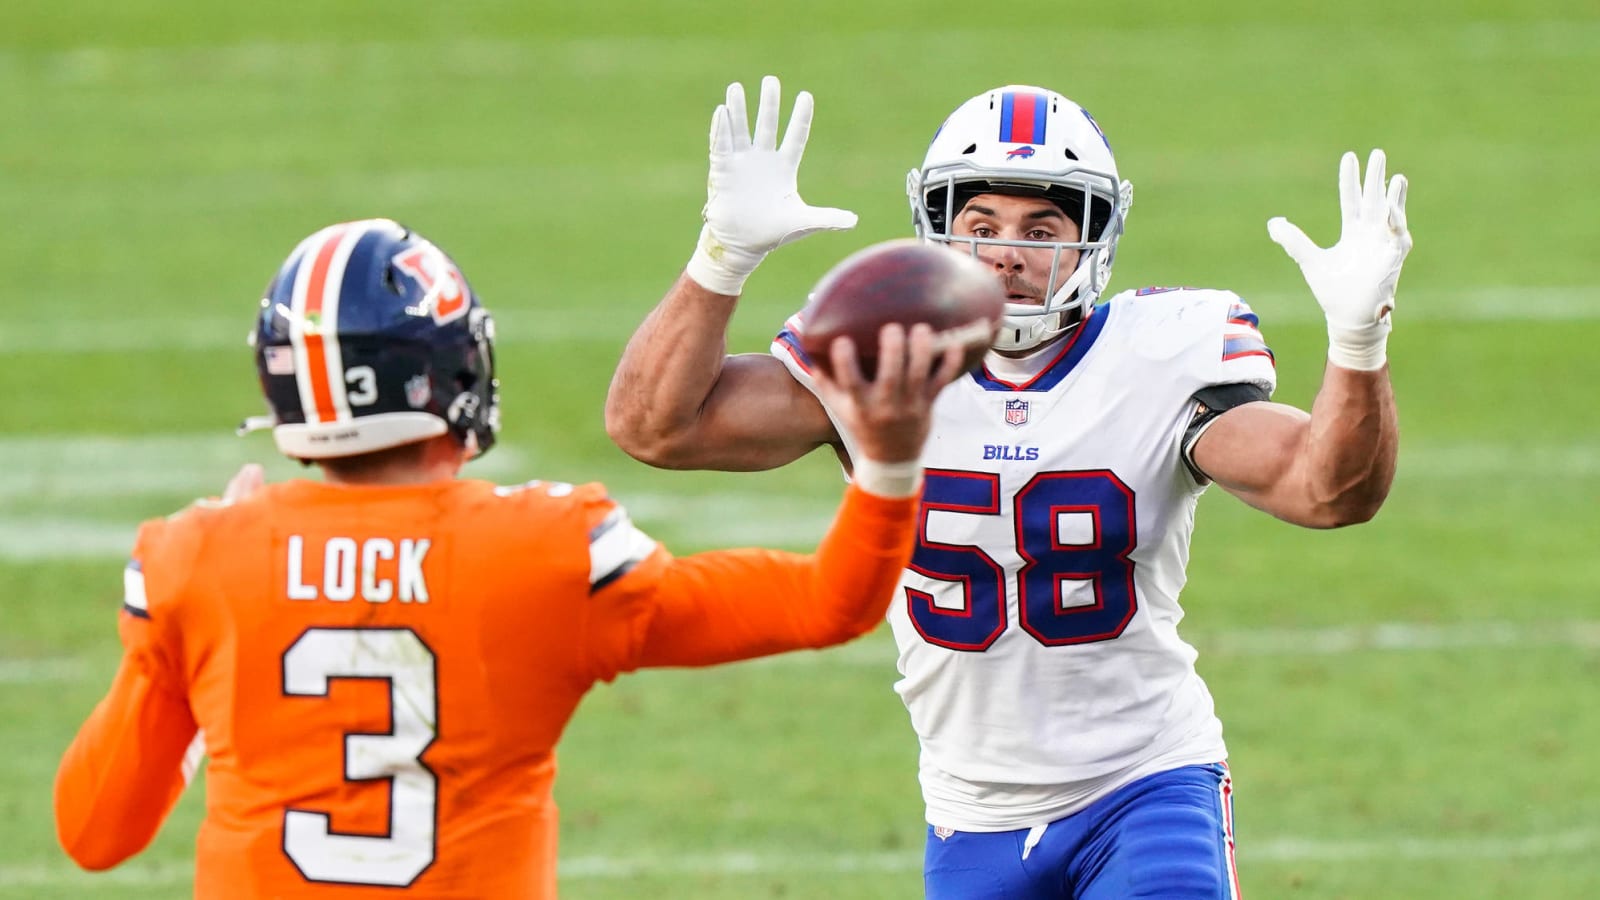 After agreeing to new contract, LB Matt Milano praises Bills' culture